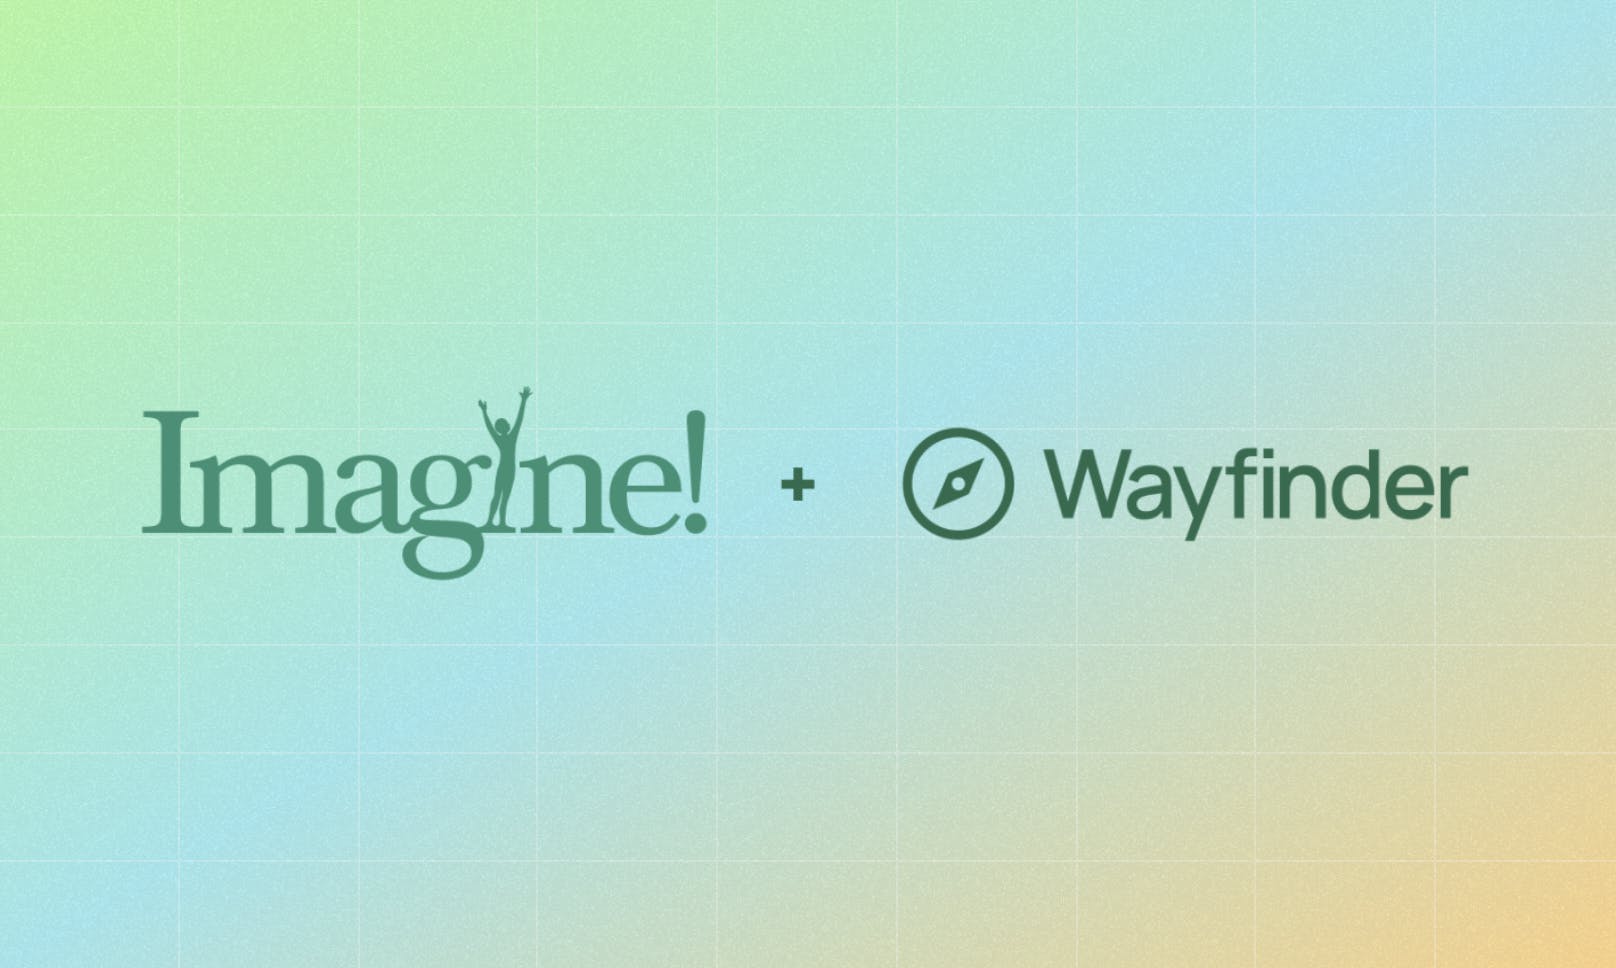 Imagine and Wayfinder's logos against a gradient backdrop.